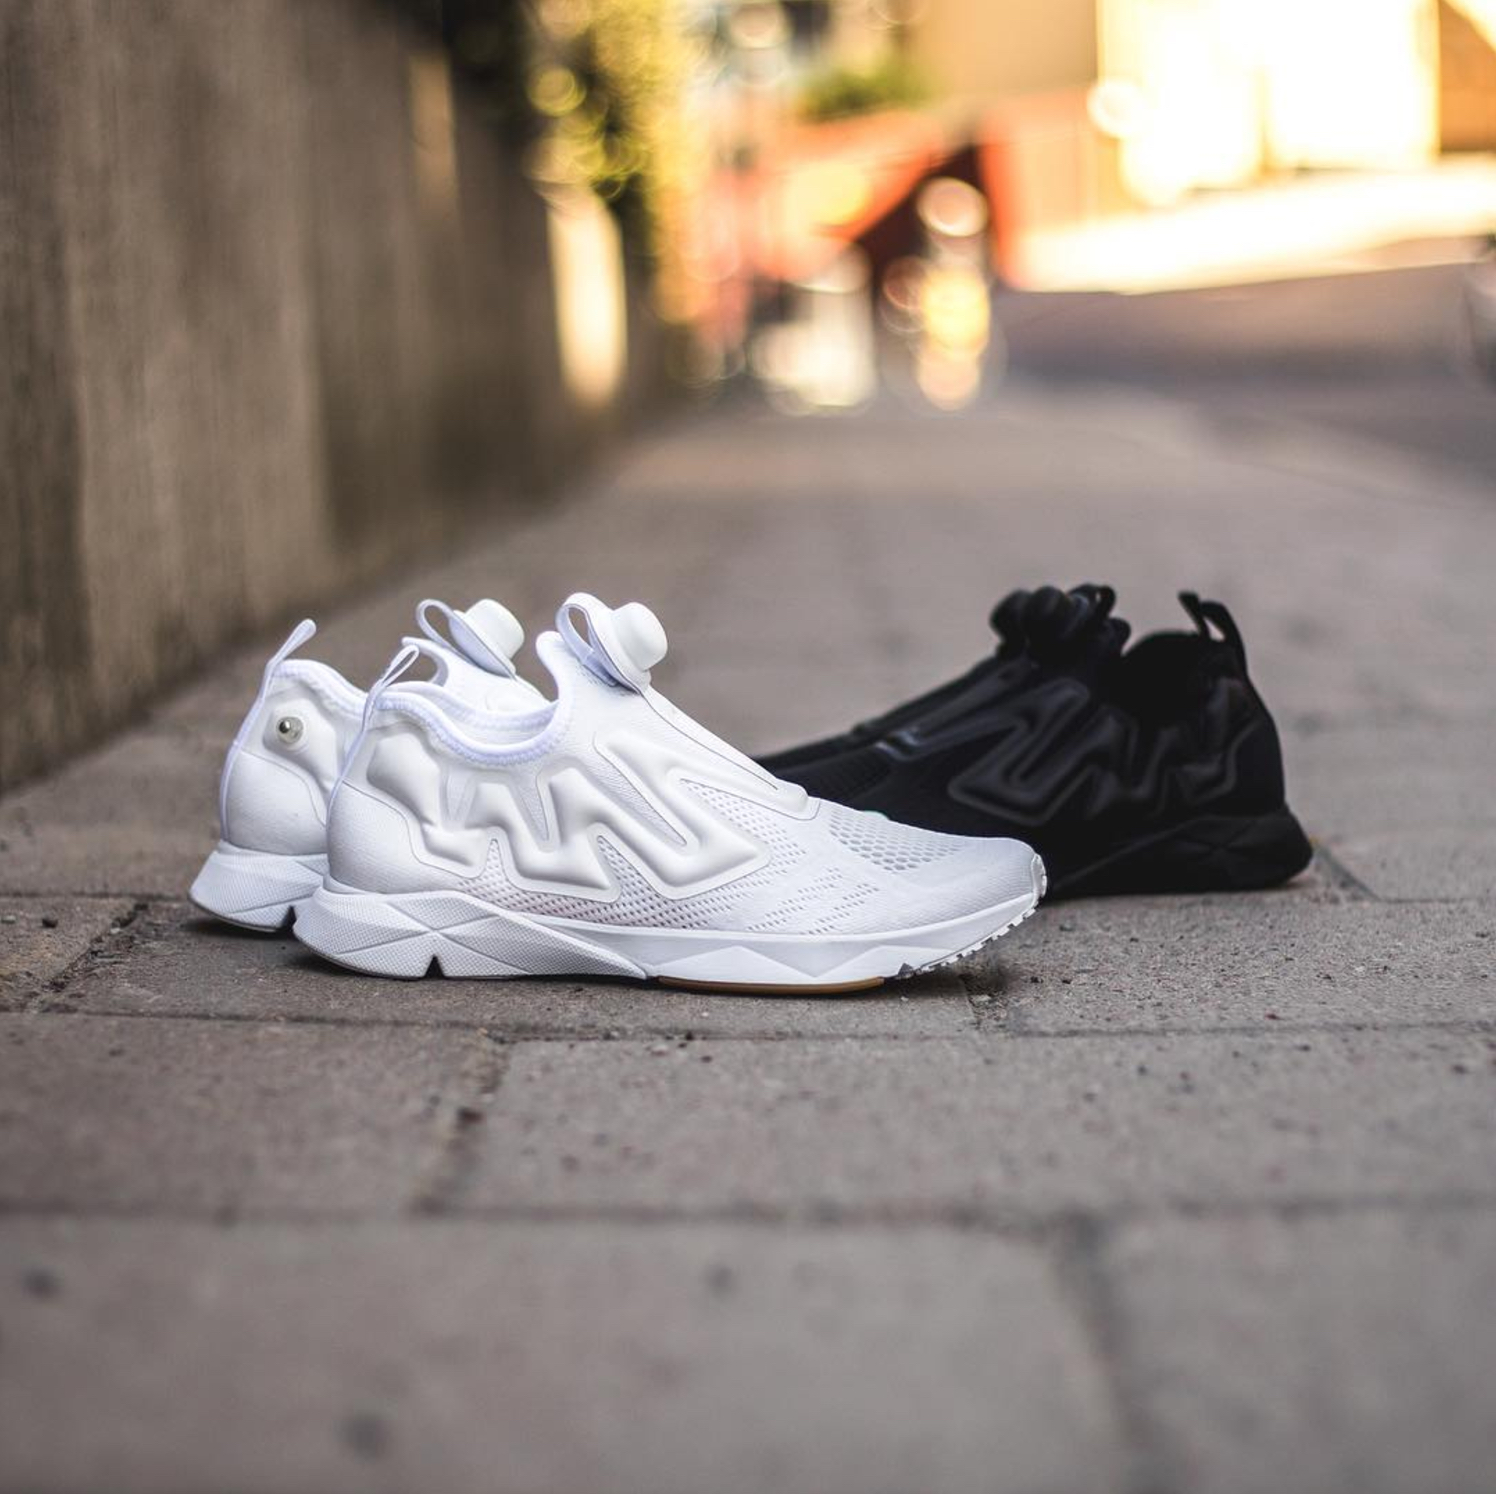 Reebok Pump Supreme Goes Monochromatic and Gets Gum WearTesters